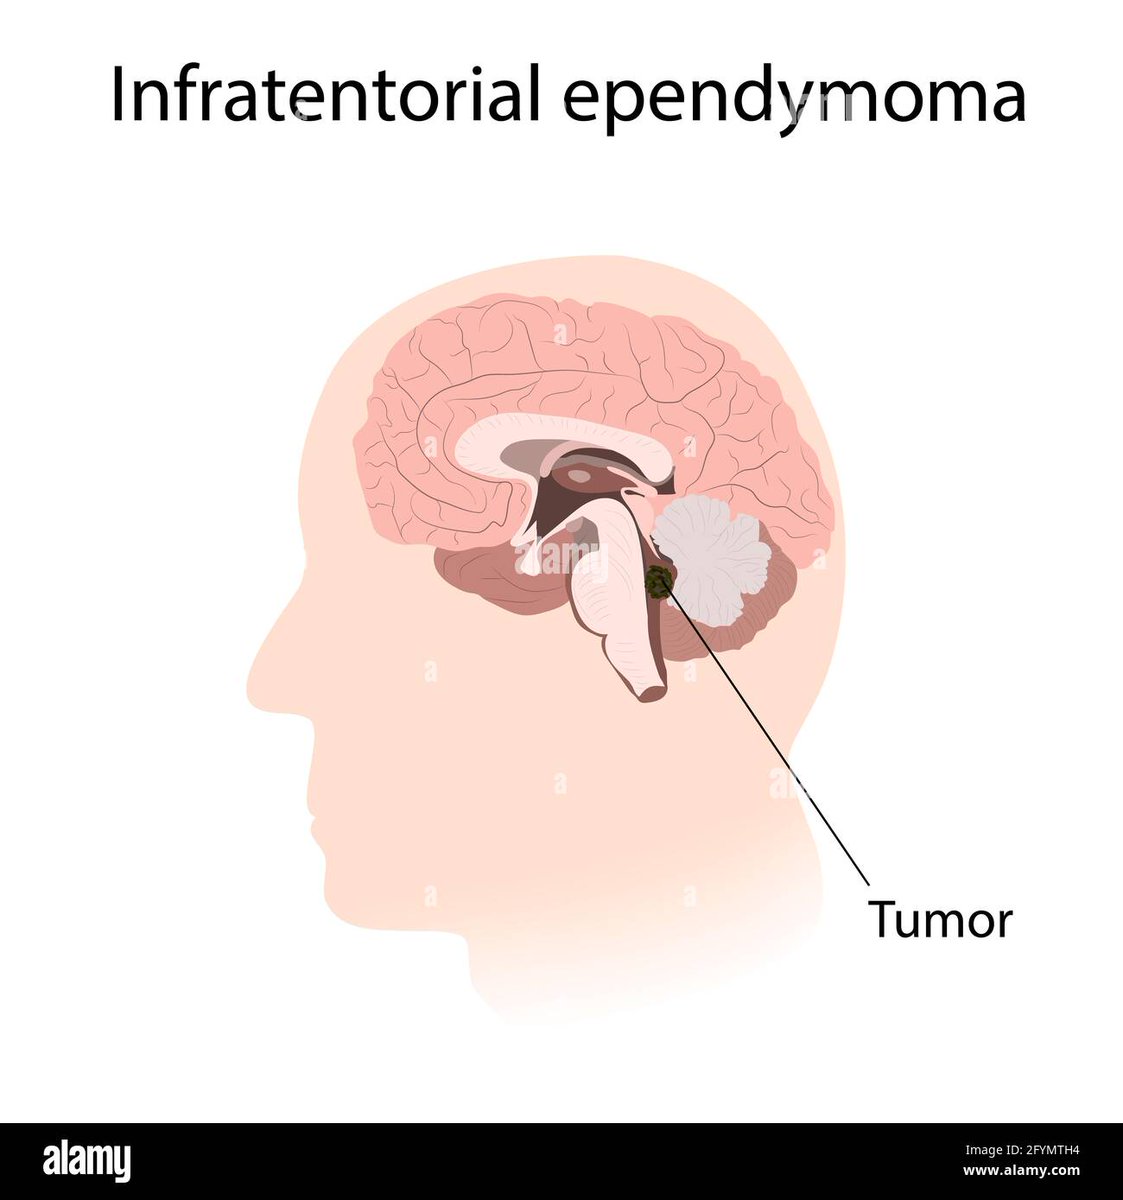 An infratentorial ependymoma is a type of brain tumor that occurs in the lower part of the brain, near the spinal cord. It is a type of ependymoma, which is a tumor that arises from cells that line the fluid-filled spaces in the brain.